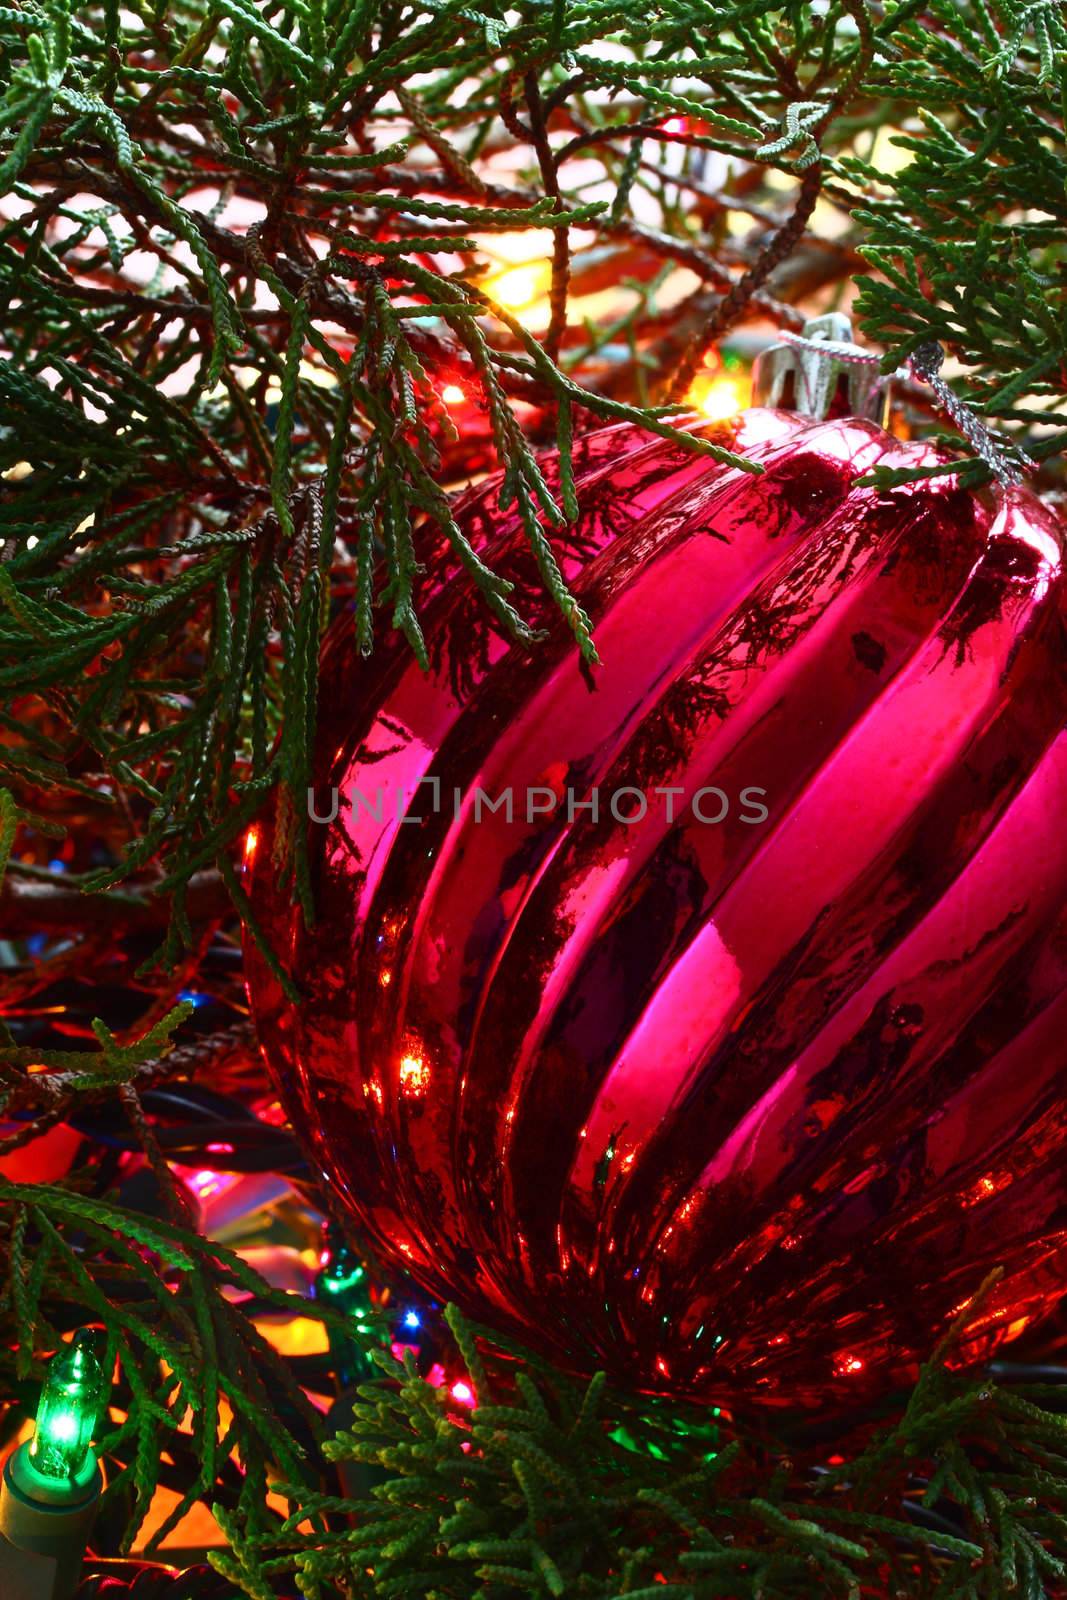 Red Ornament by Geoarts